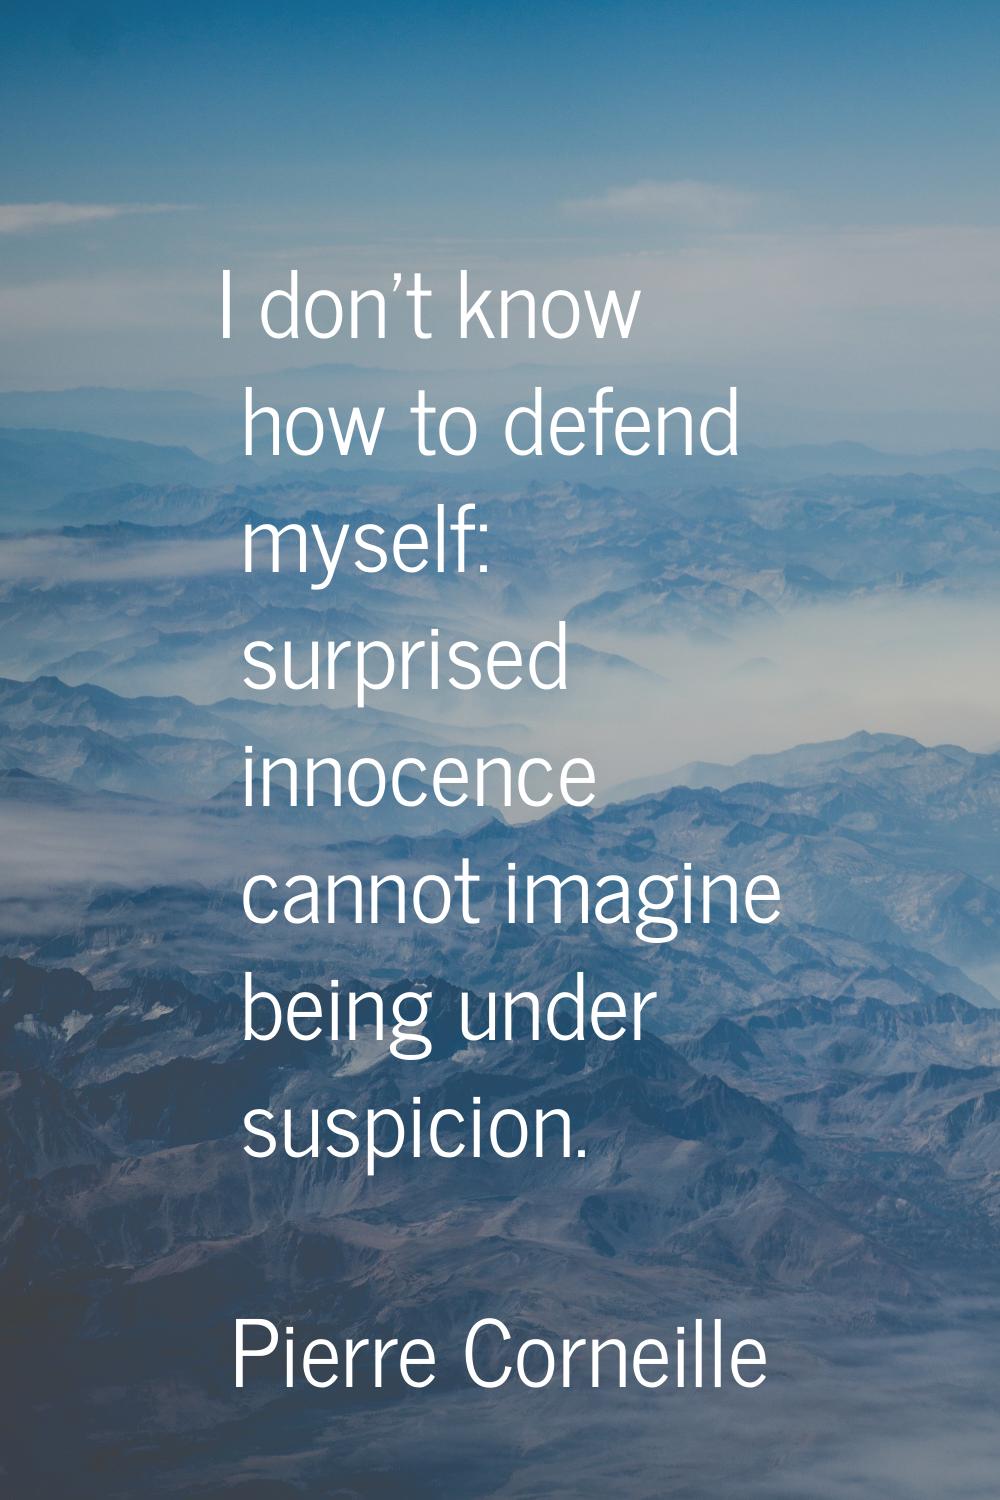 I don't know how to defend myself: surprised innocence cannot imagine being under suspicion.